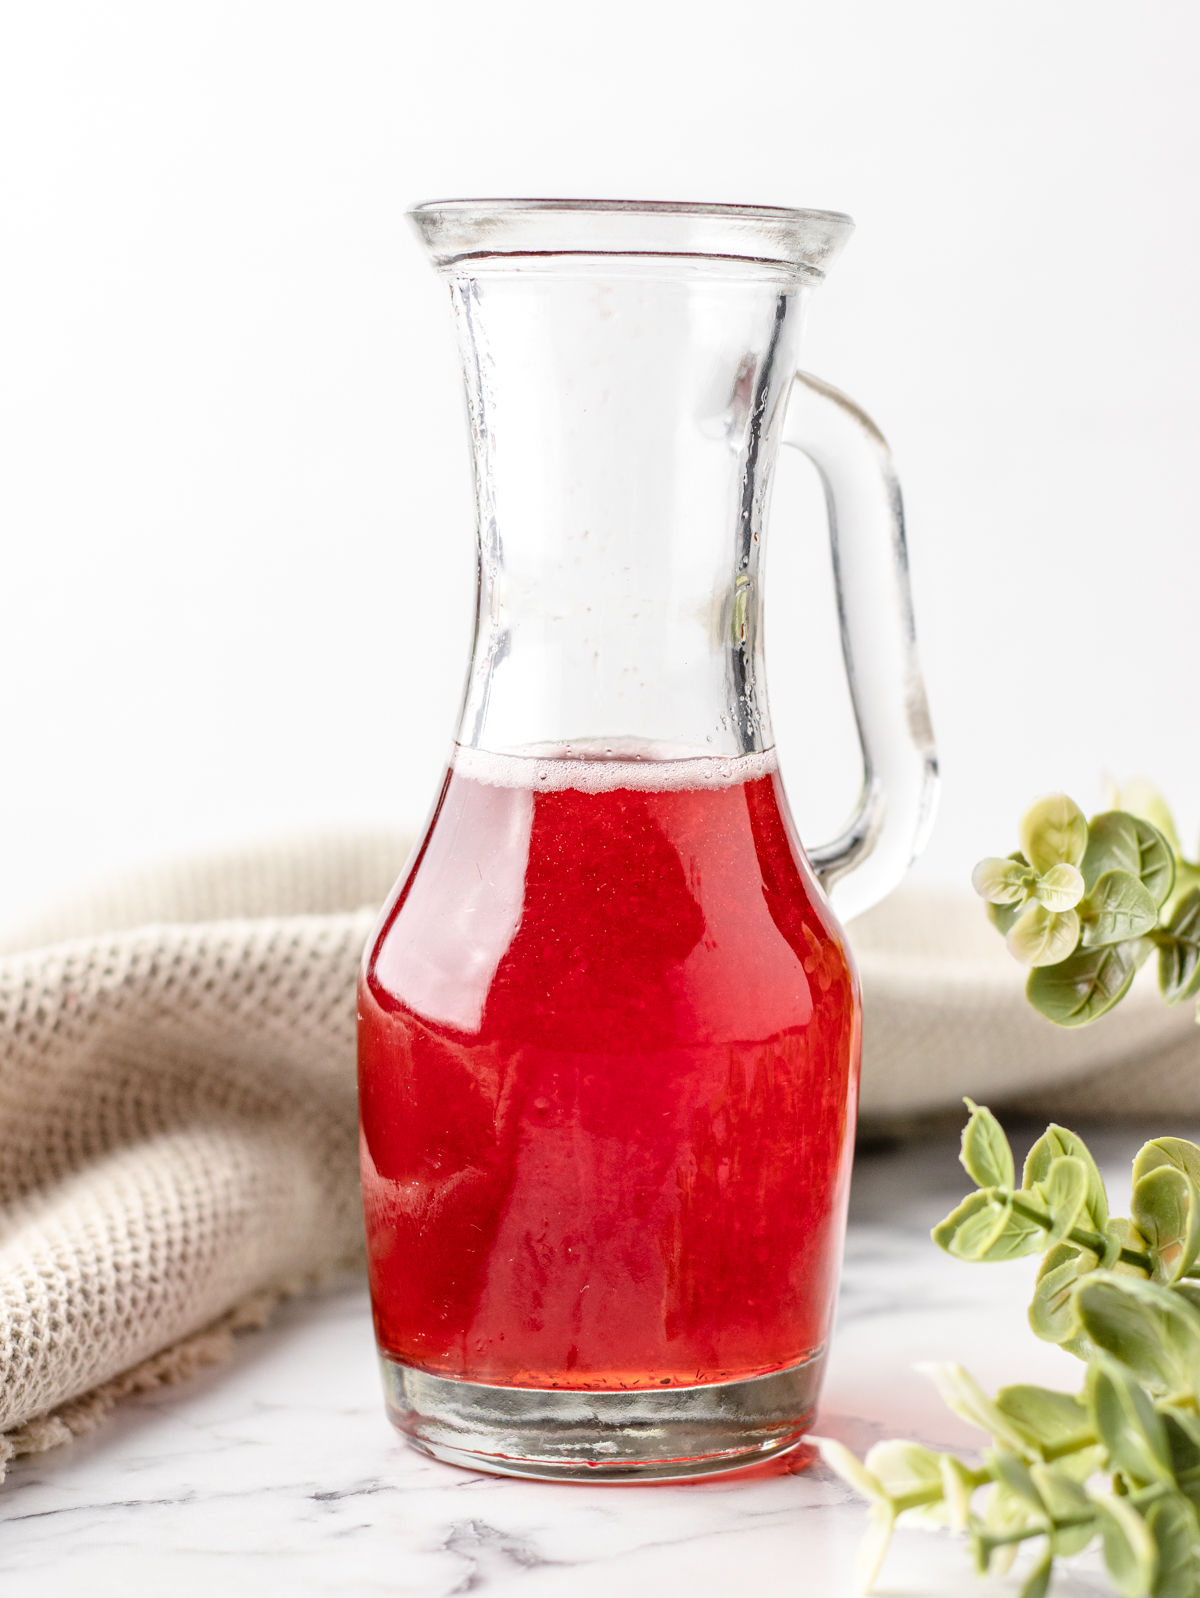 Strawberry Simple Syrup using discarded strawberry tops in a glass handled container.